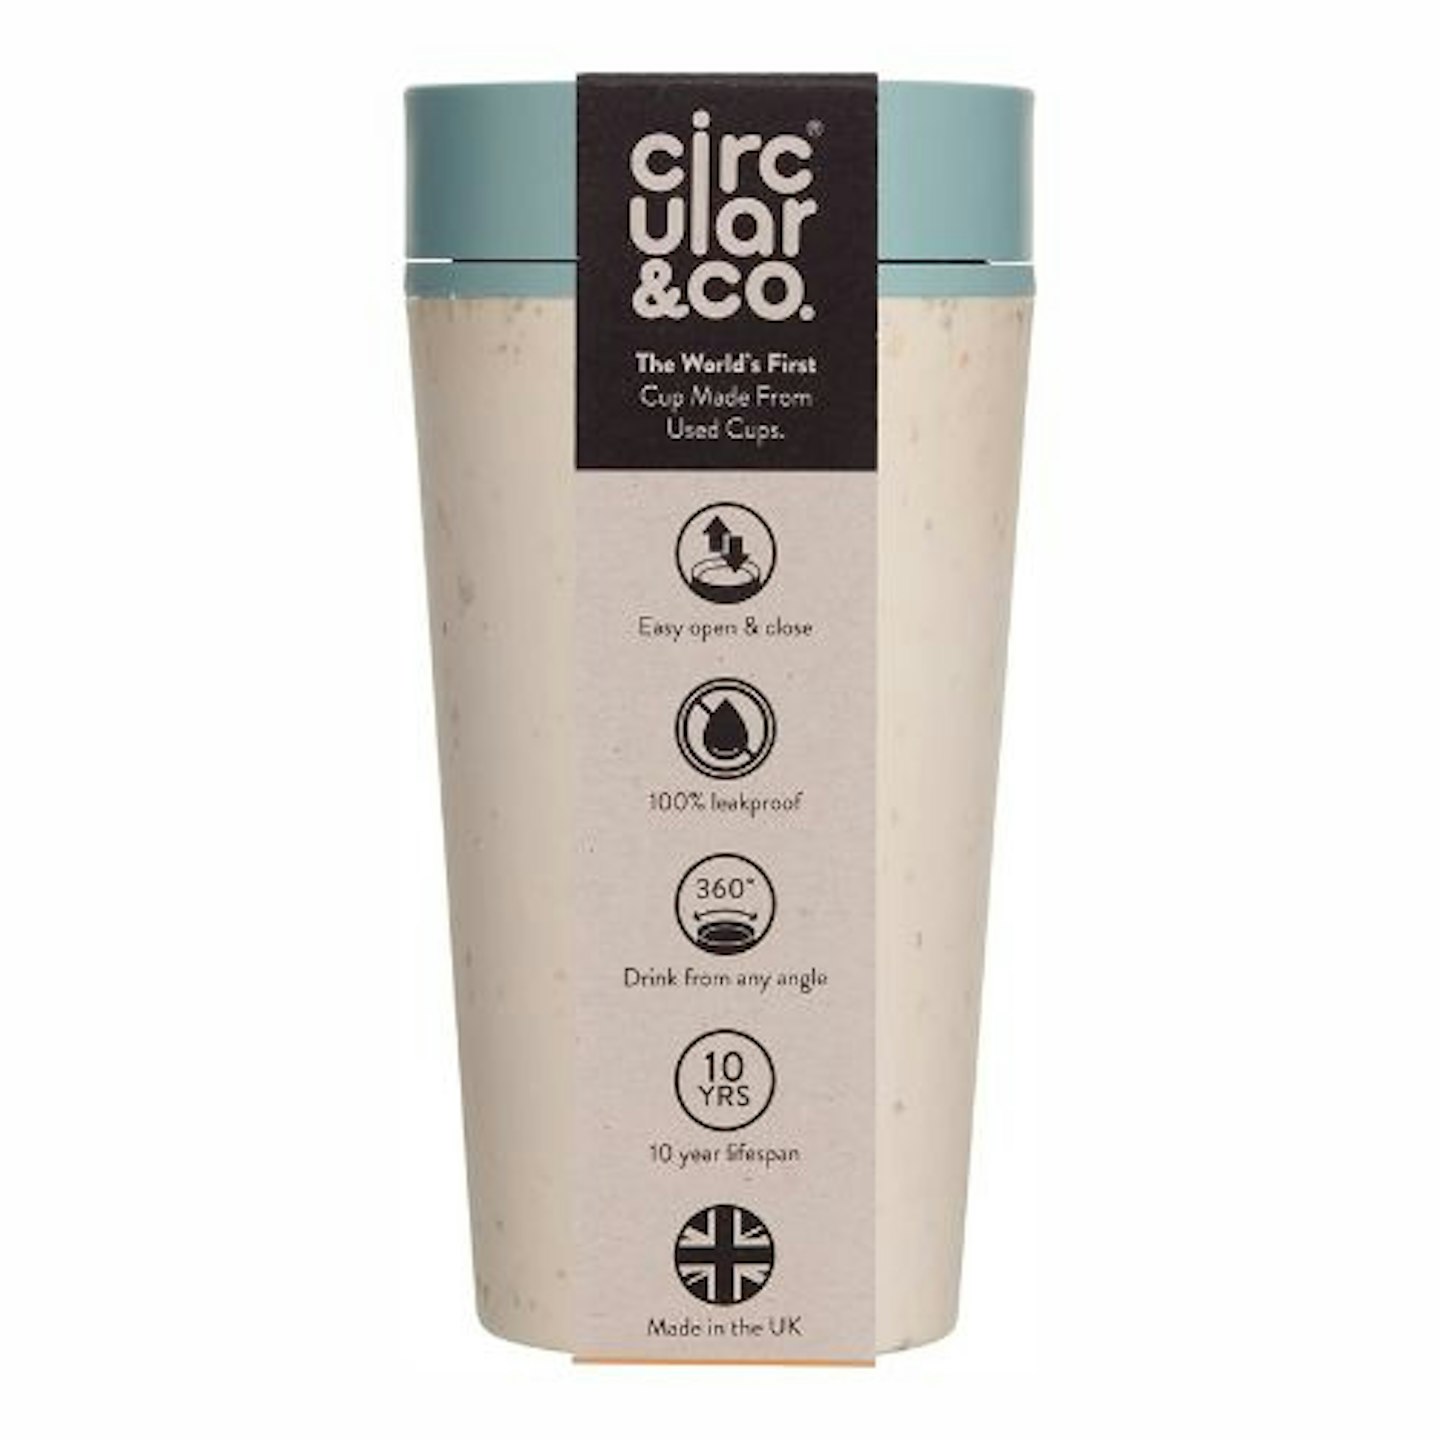 https://images.bauerhosting.com/affiliates/sites/10/2023/02/Circular-and-Co-Leakproof-Reusable-Coffee-Cup-12oz340ml-1.jpg?auto=format&w=1440&q=80